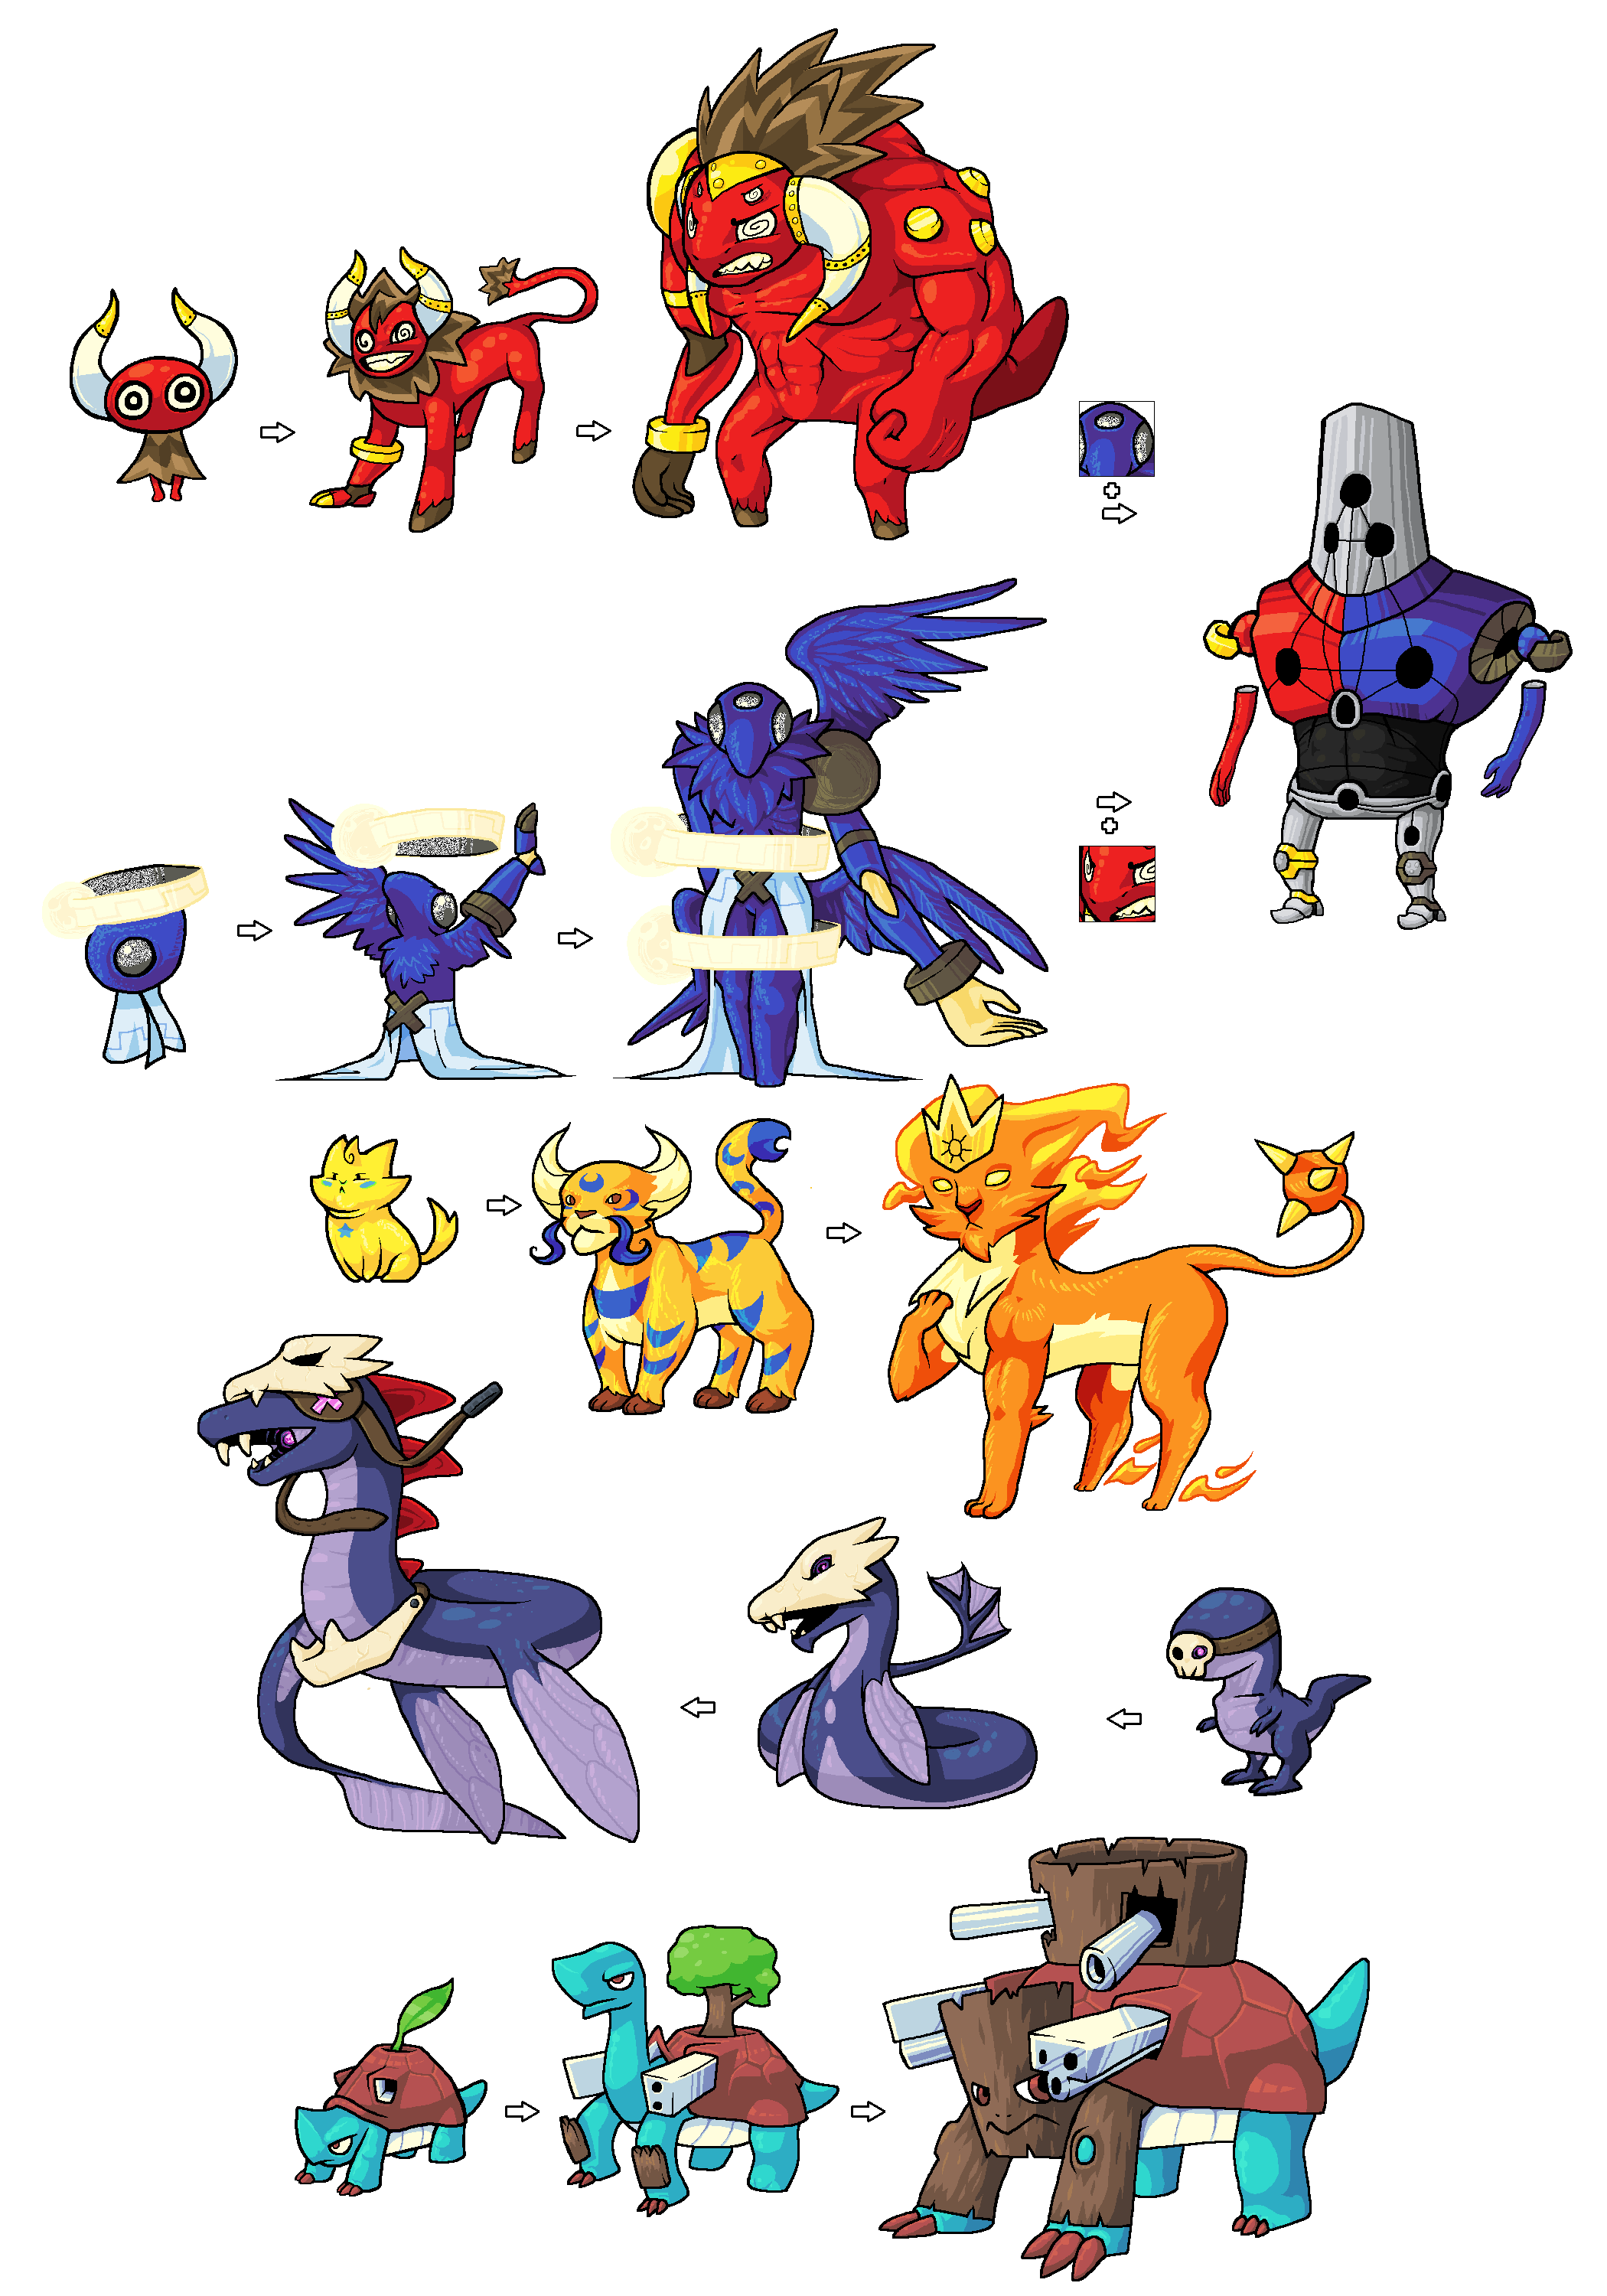 2100x3000px Digimon Fusion Wallpapers.